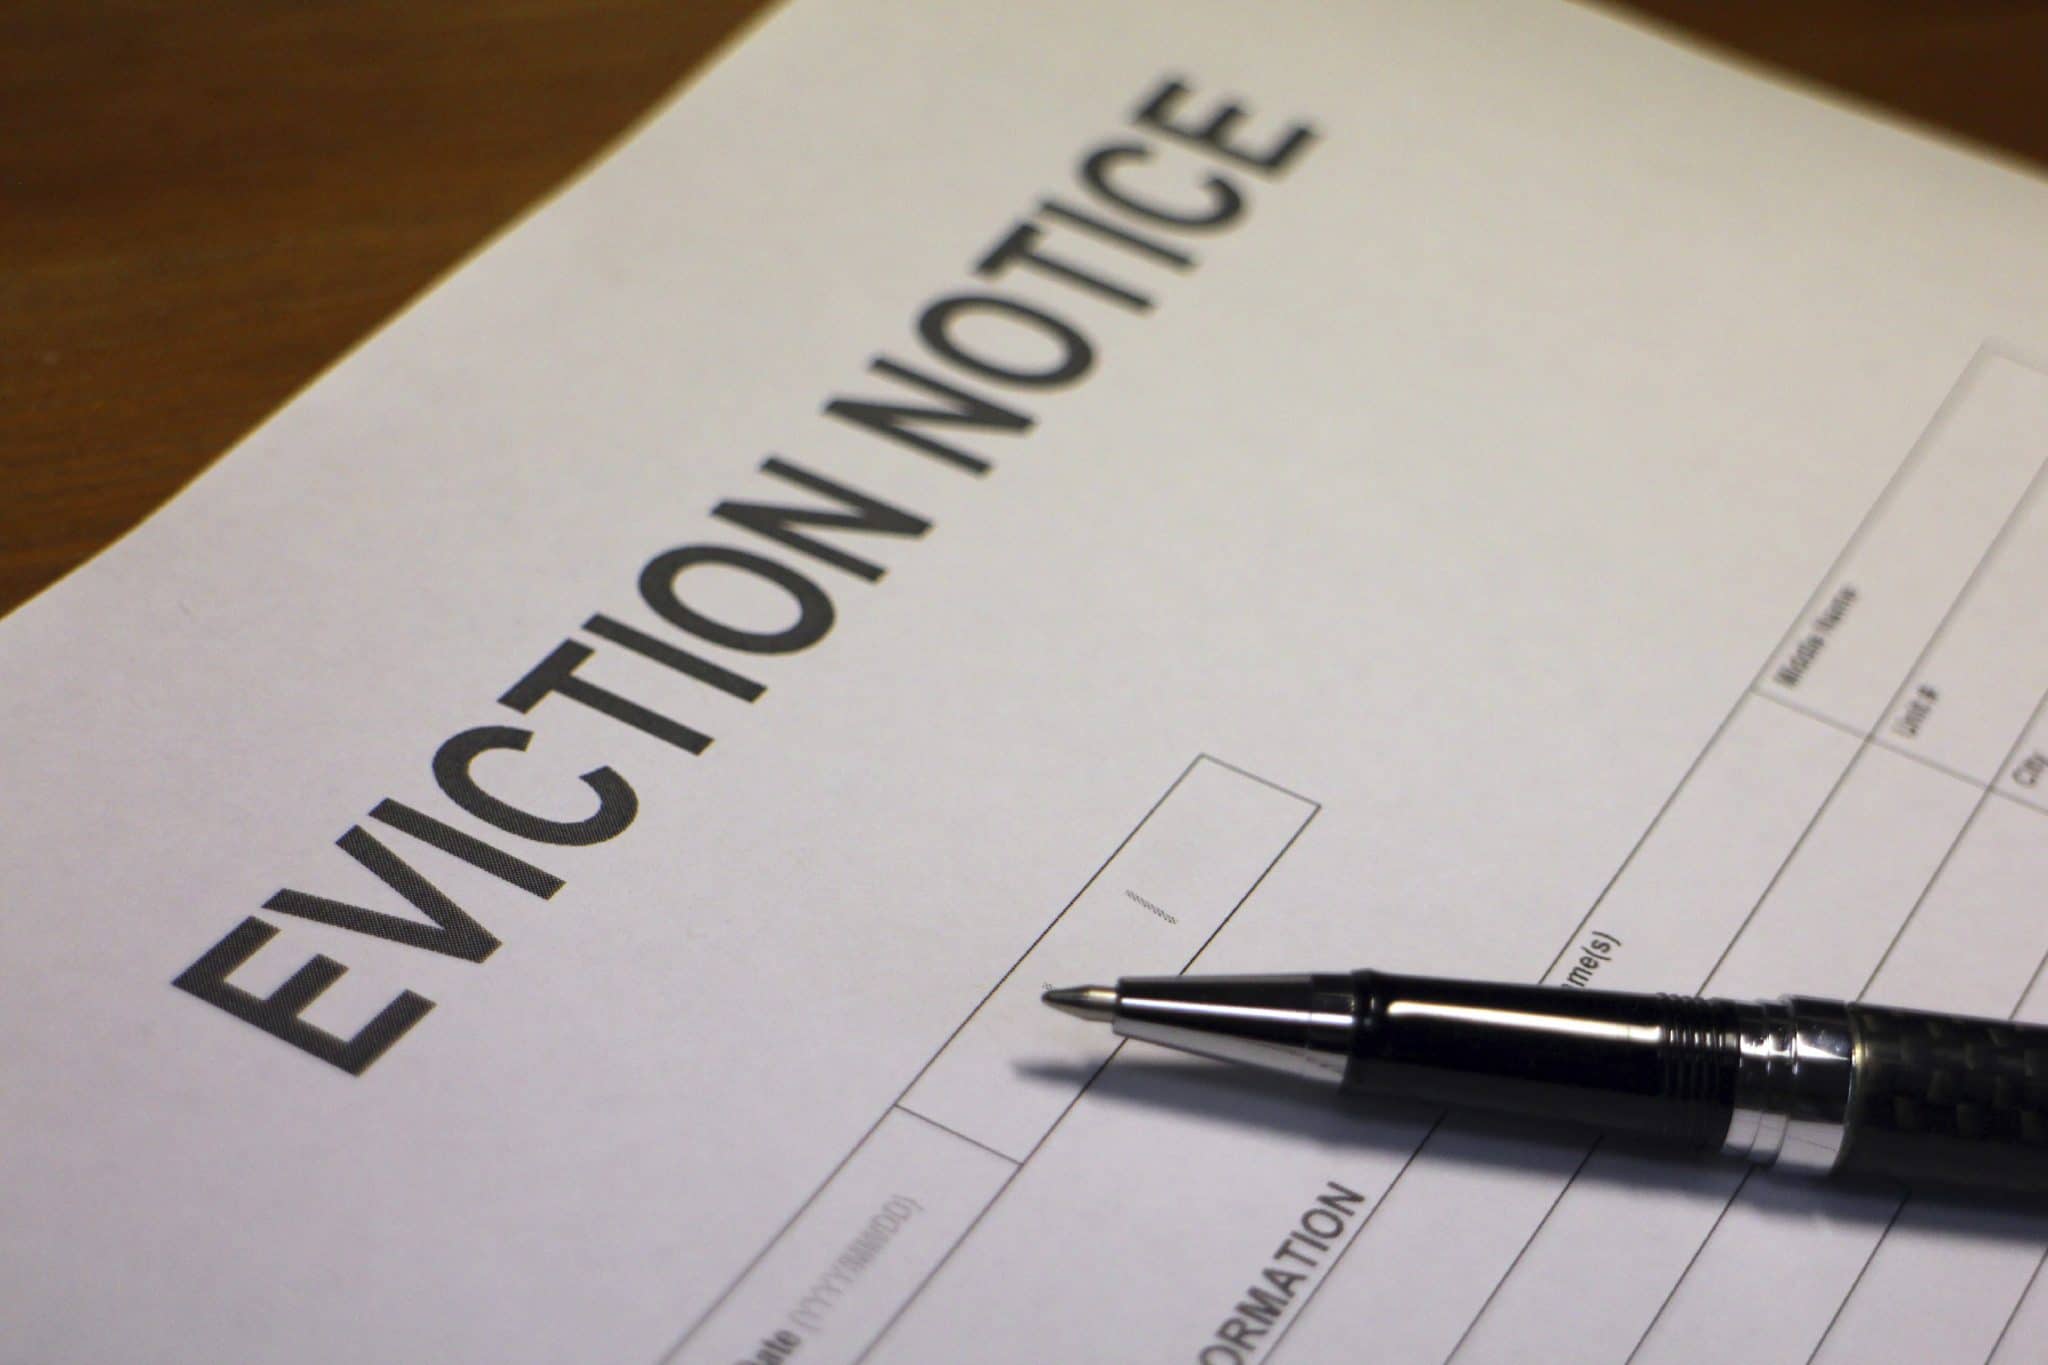 If my private landlord asks me to leave, what are my rights?